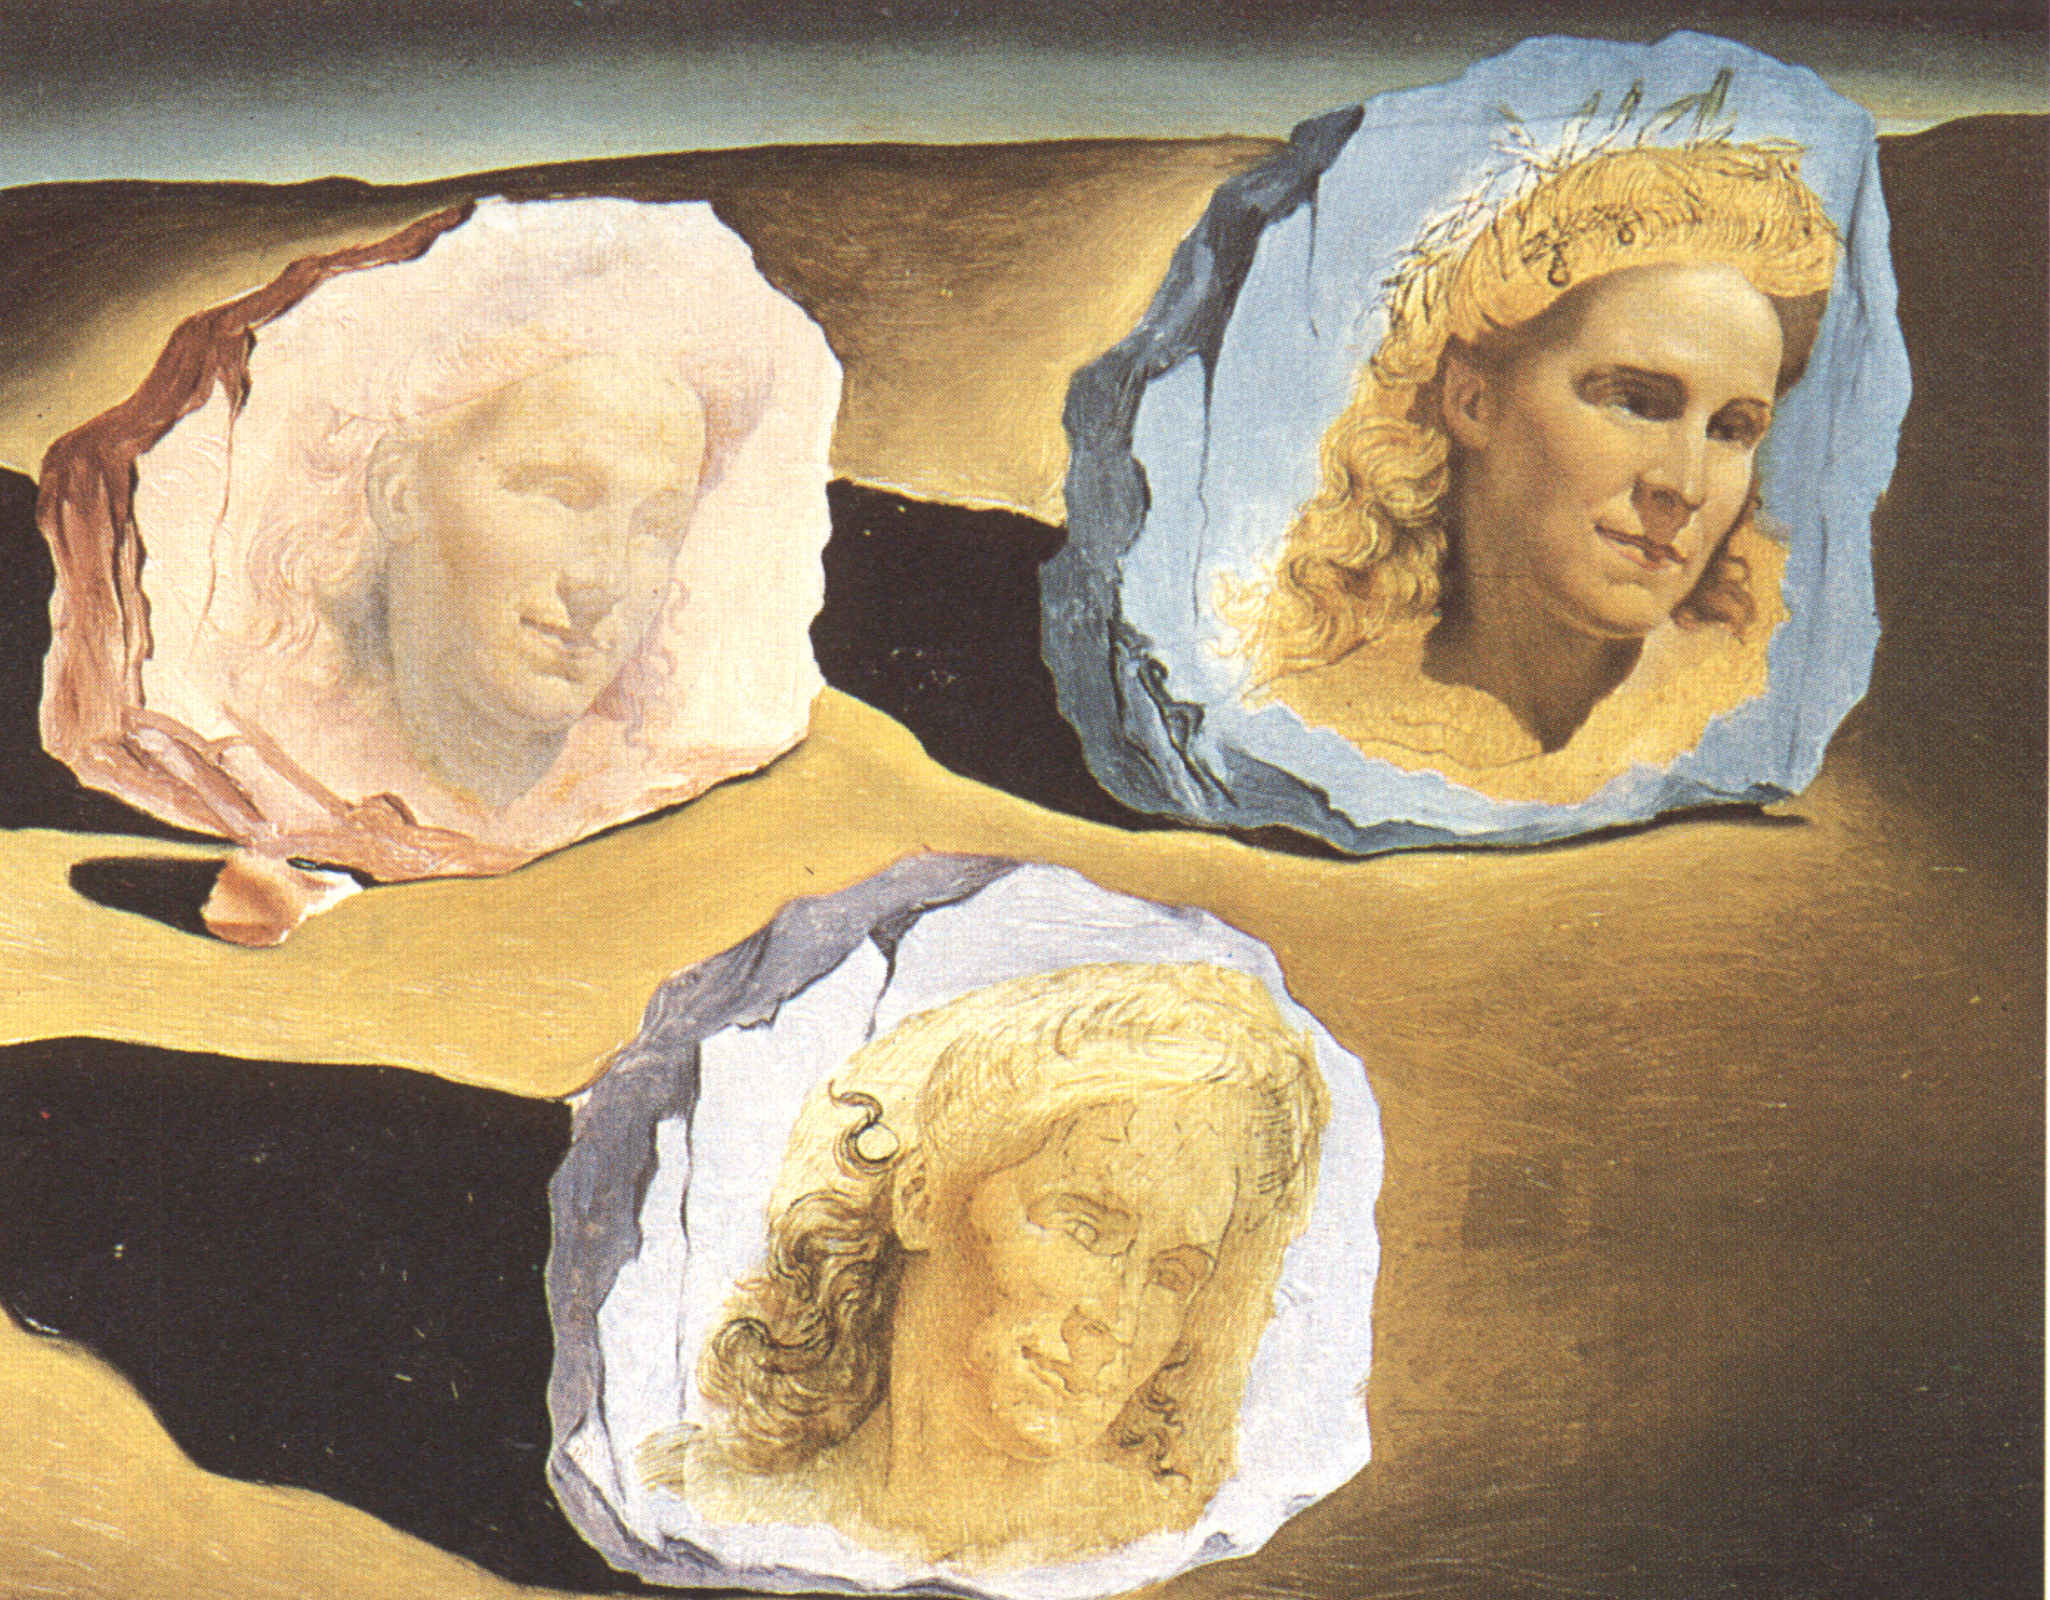 Three Apparitions of the Visage of Gala (1945).